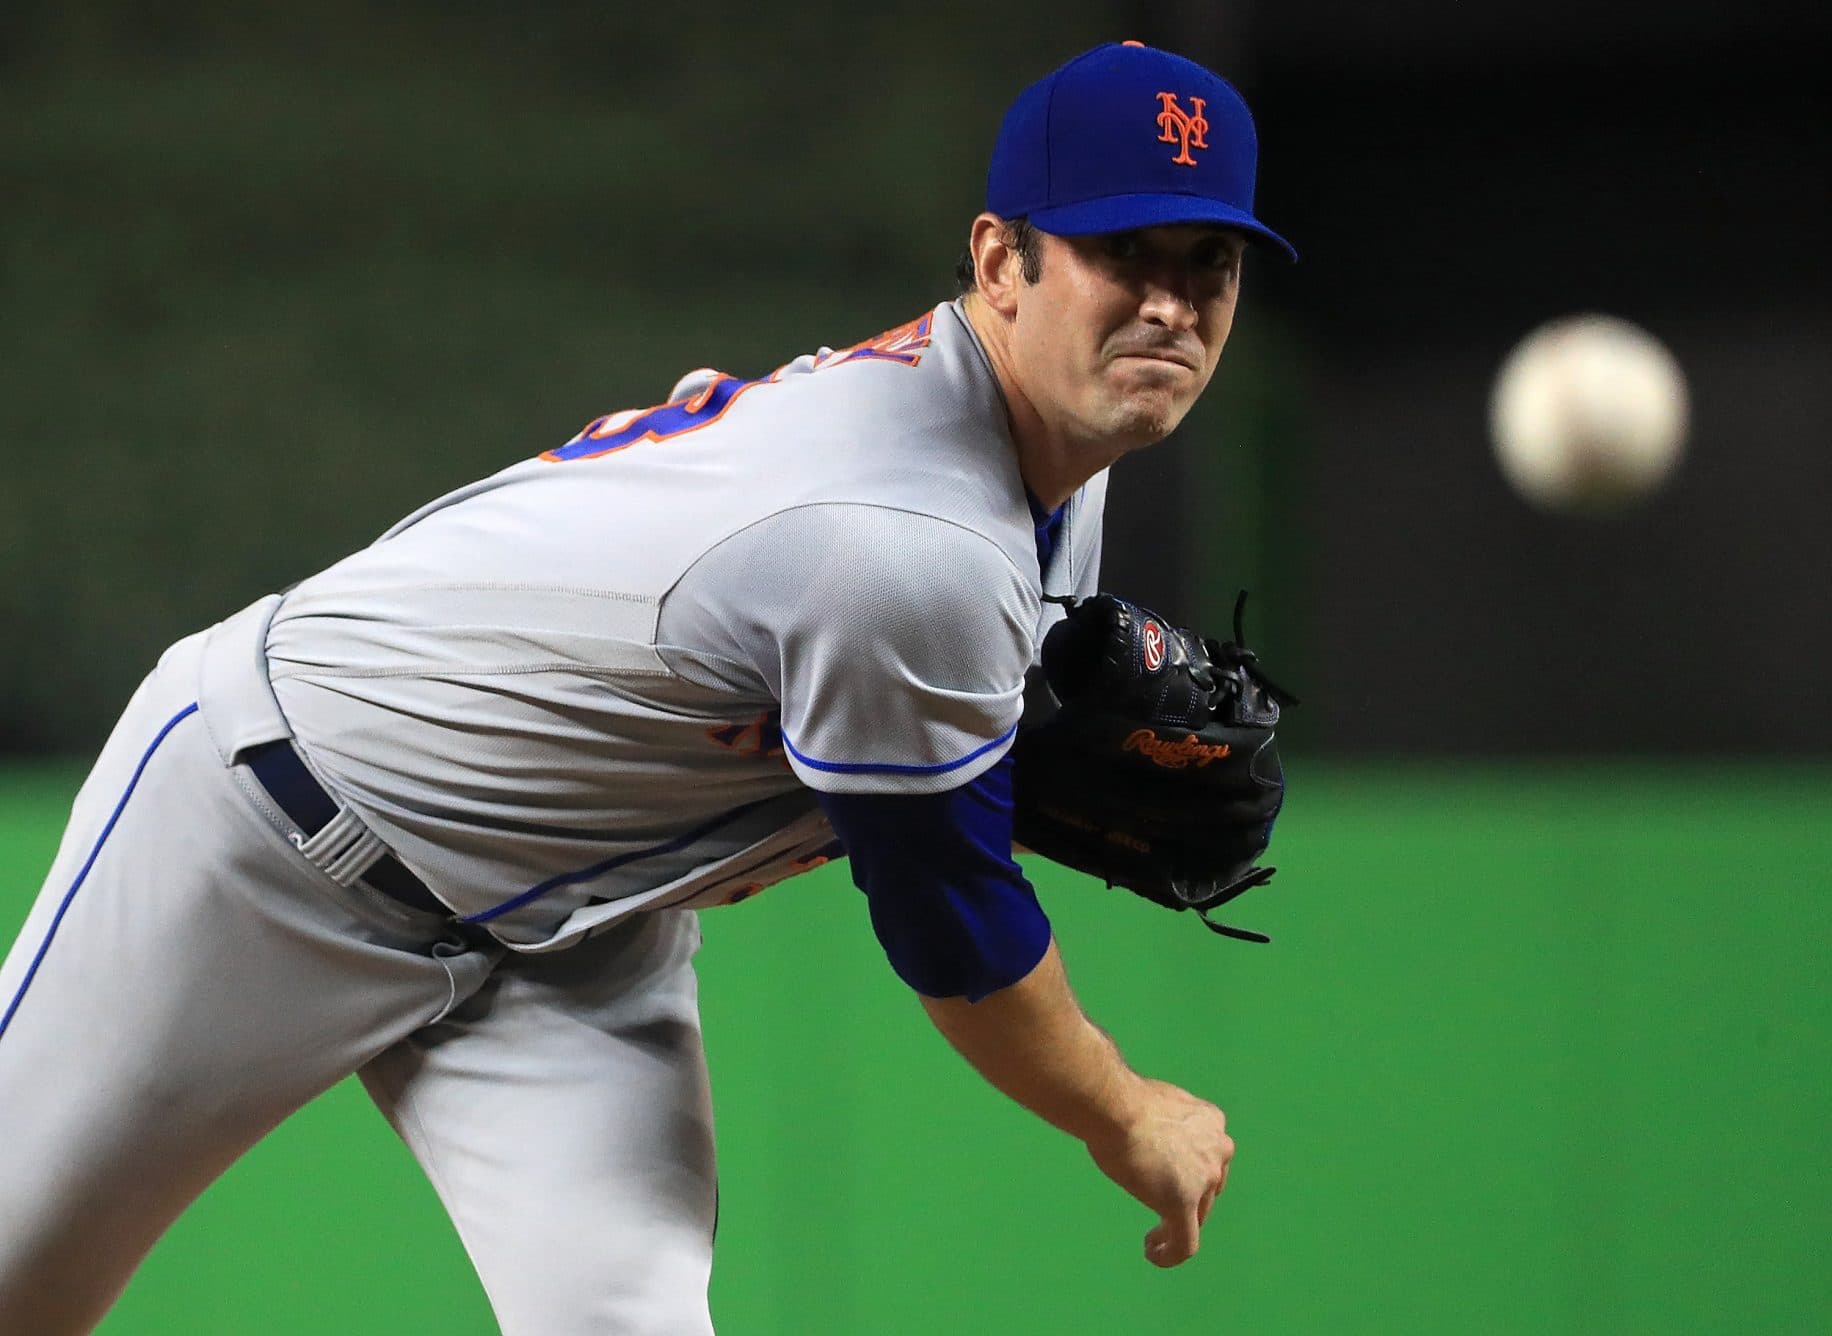 Why on Earth did the New York Mets tender a contract to Matt Harvey?